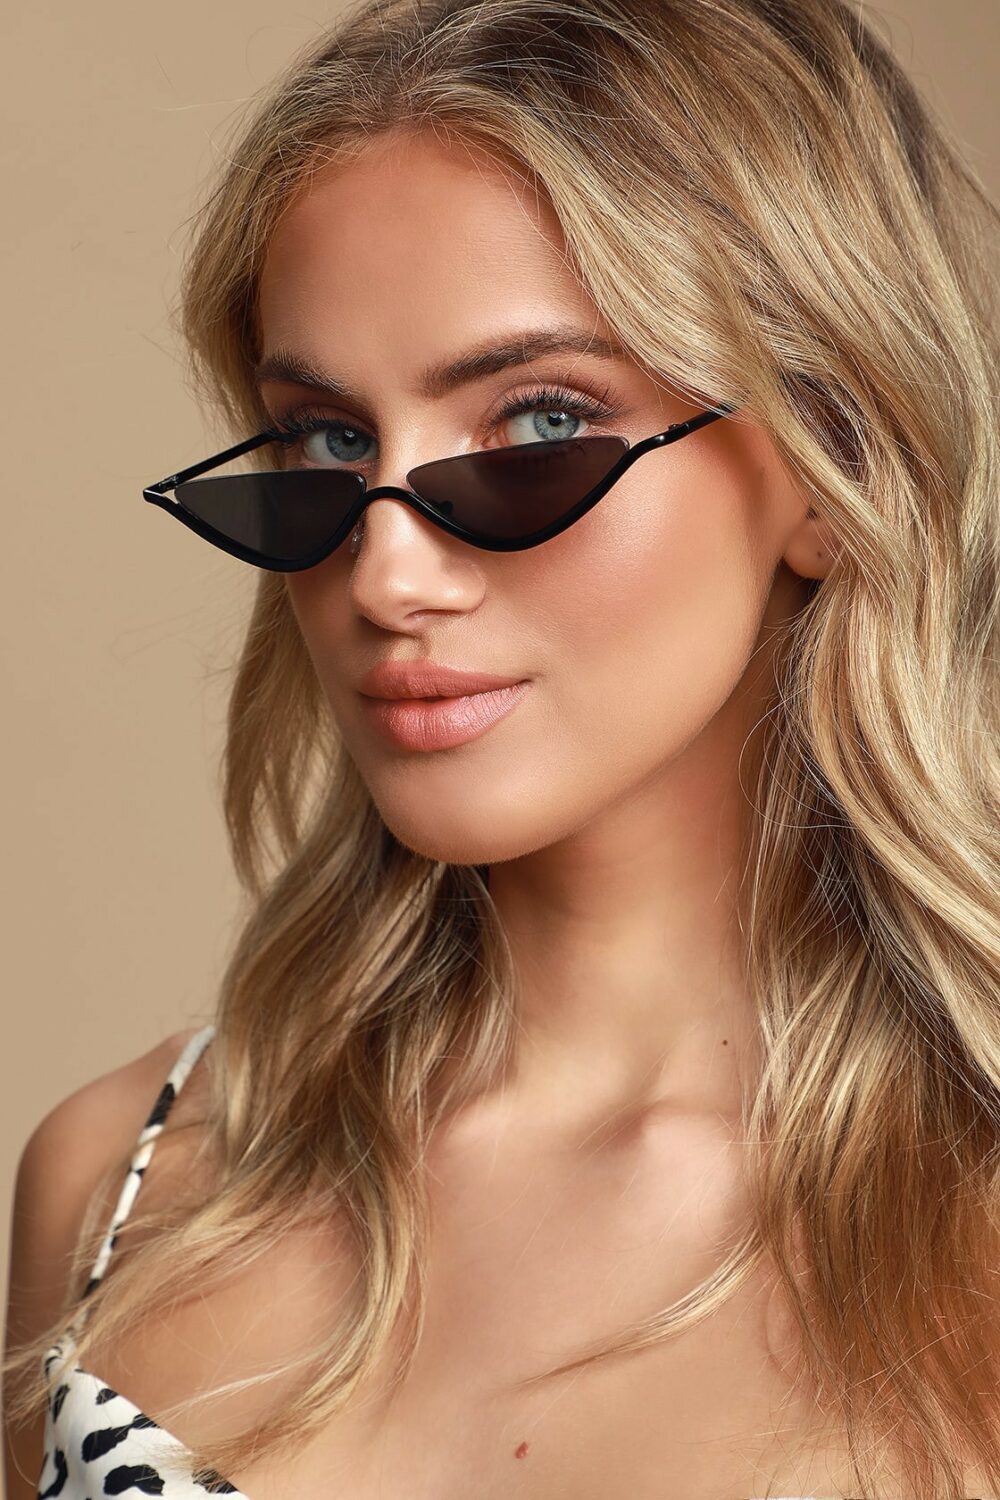 These days everyone wants a pair of black cat eye sunglasses. The tiny rimless lenses in the trendy cats eye form are a perfect complement